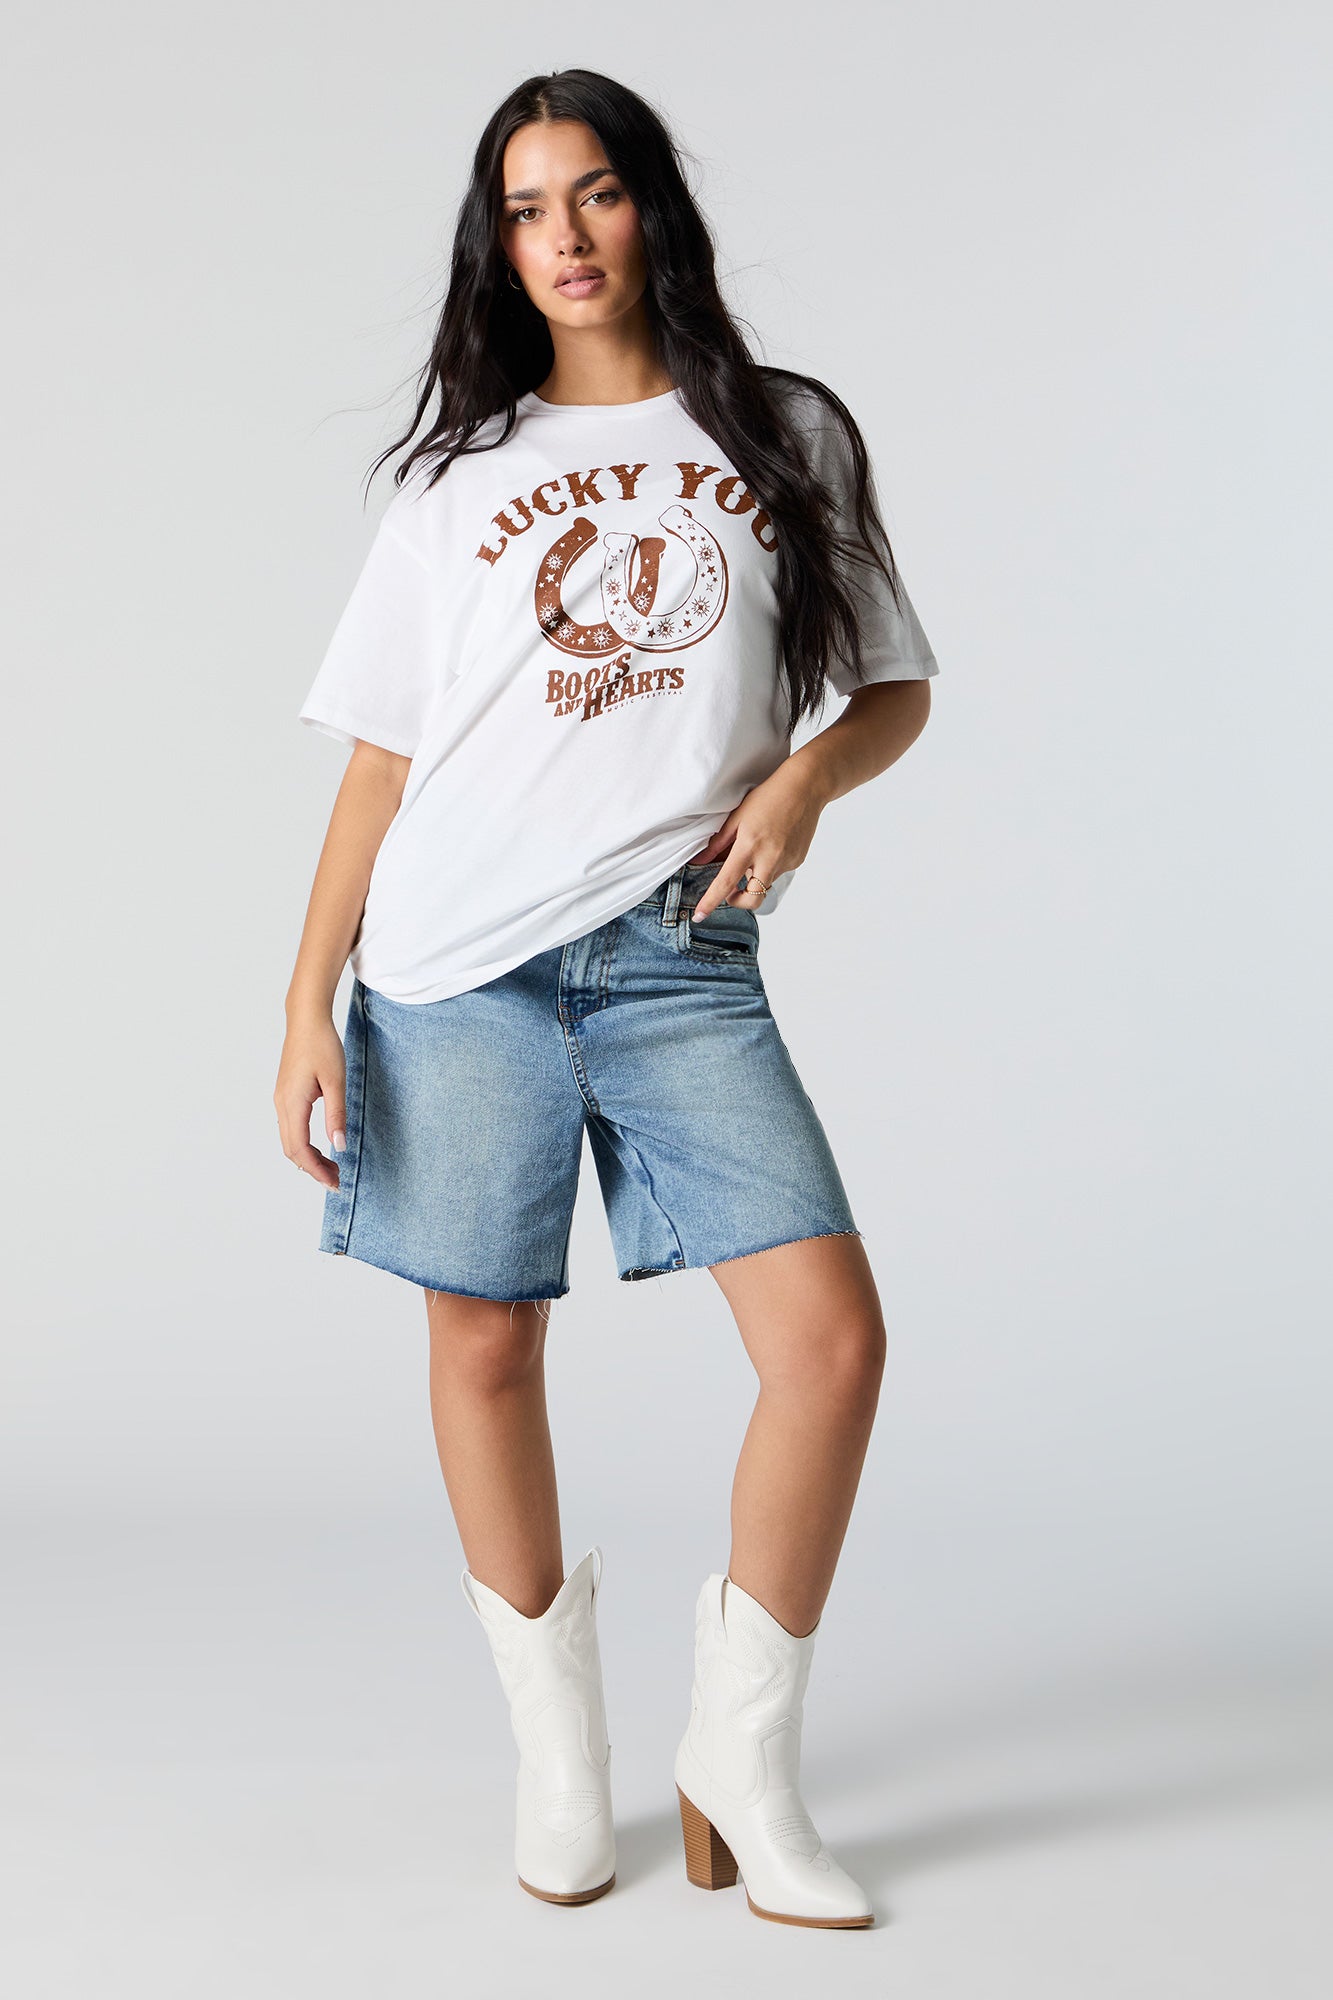 Lucky You Boots and Hearts Graphic Boyfriend T-Shirt